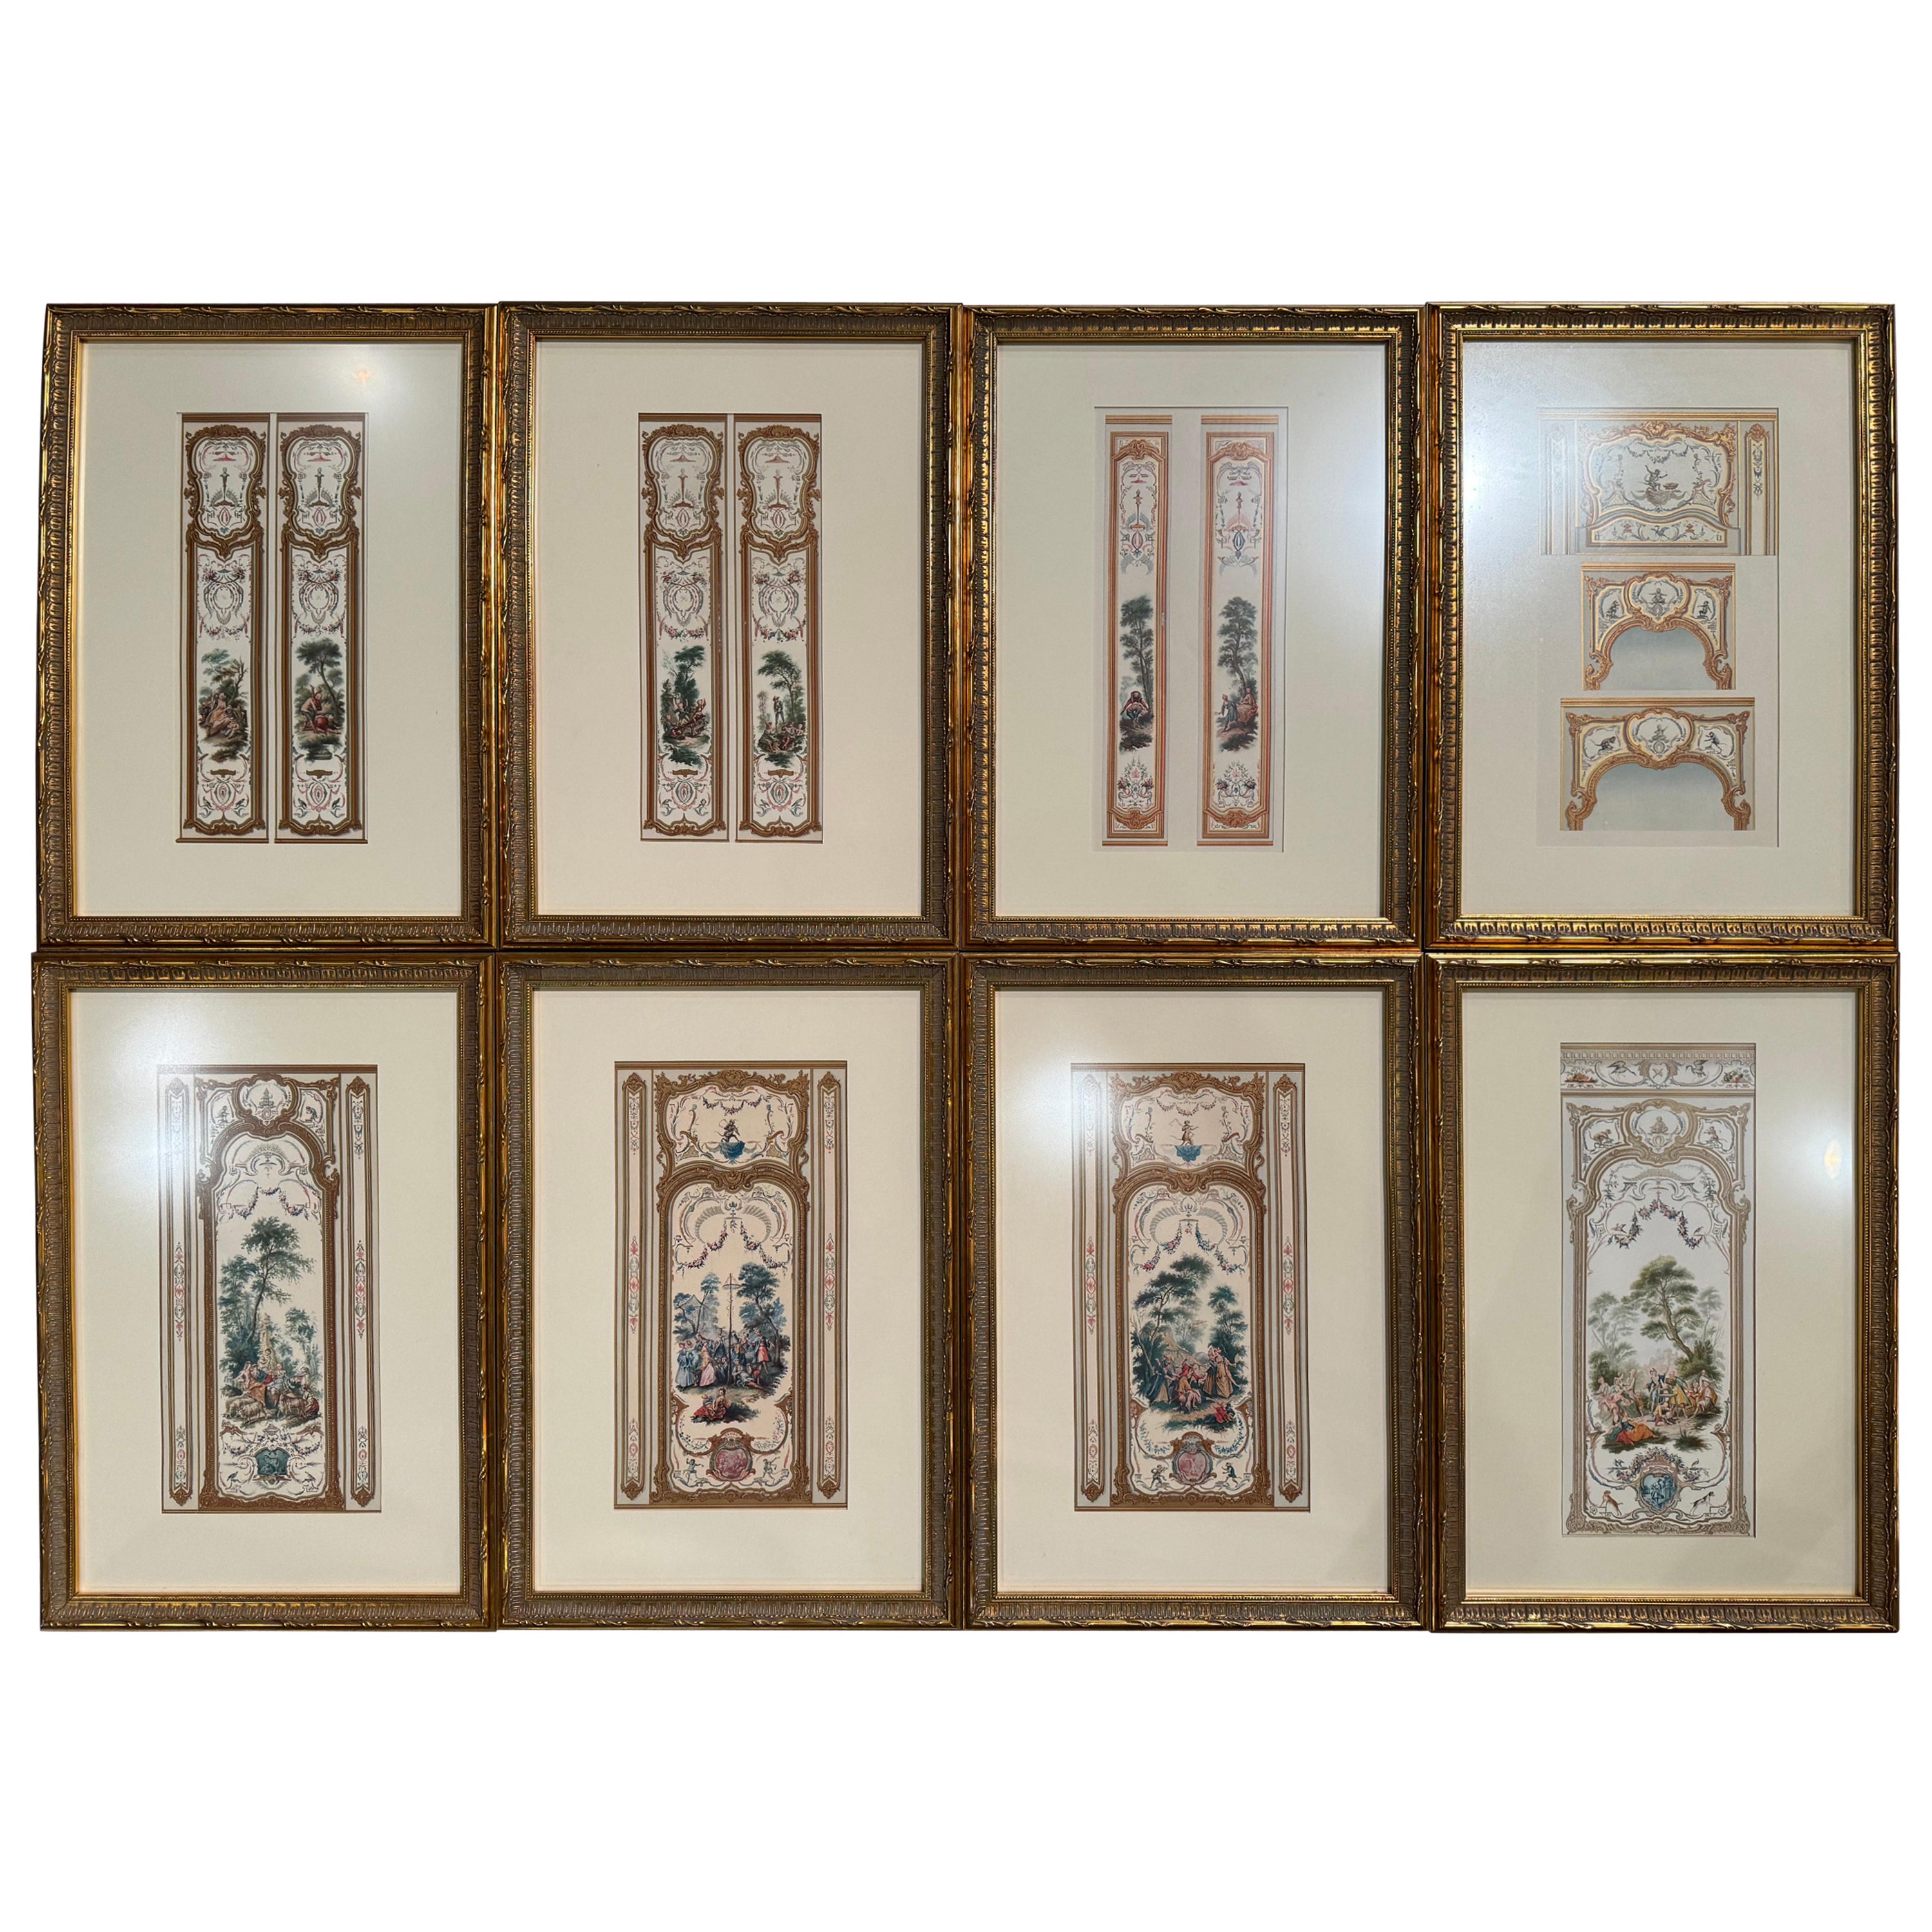 Early 20th Century French Hand Painted & Framed Architectural Drawings, Set of 8